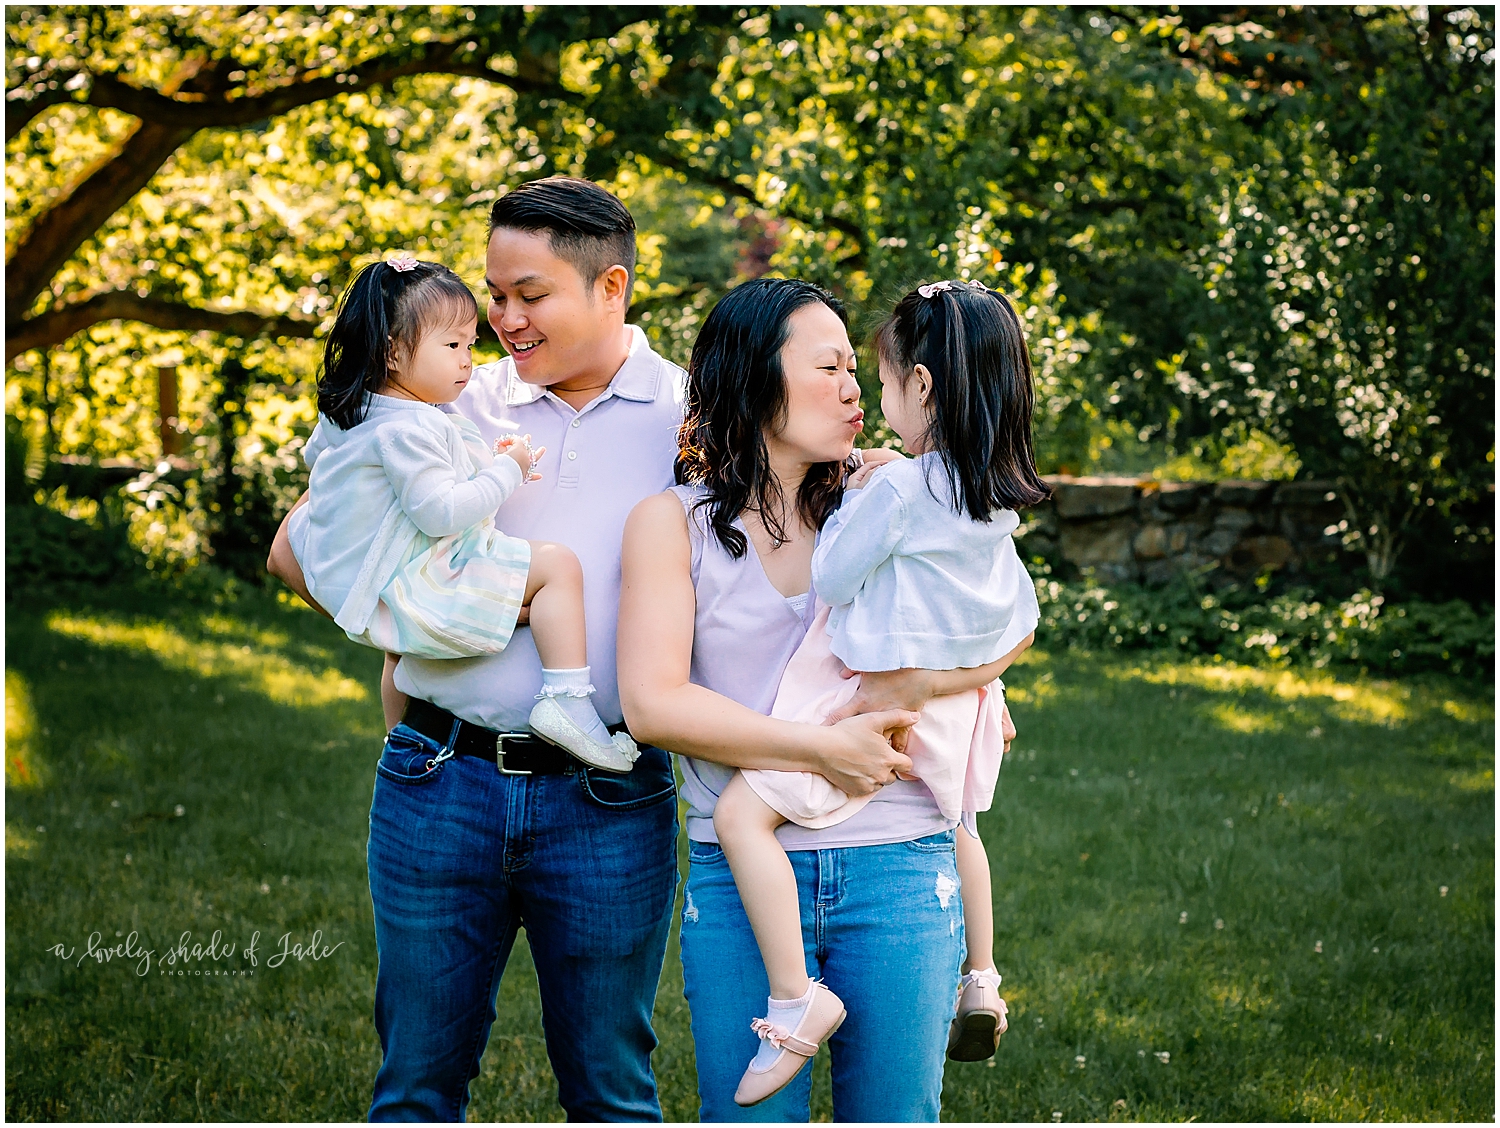 Fun_Extended_Family_Session_Morristown_NJ_Photography_0014.jpg